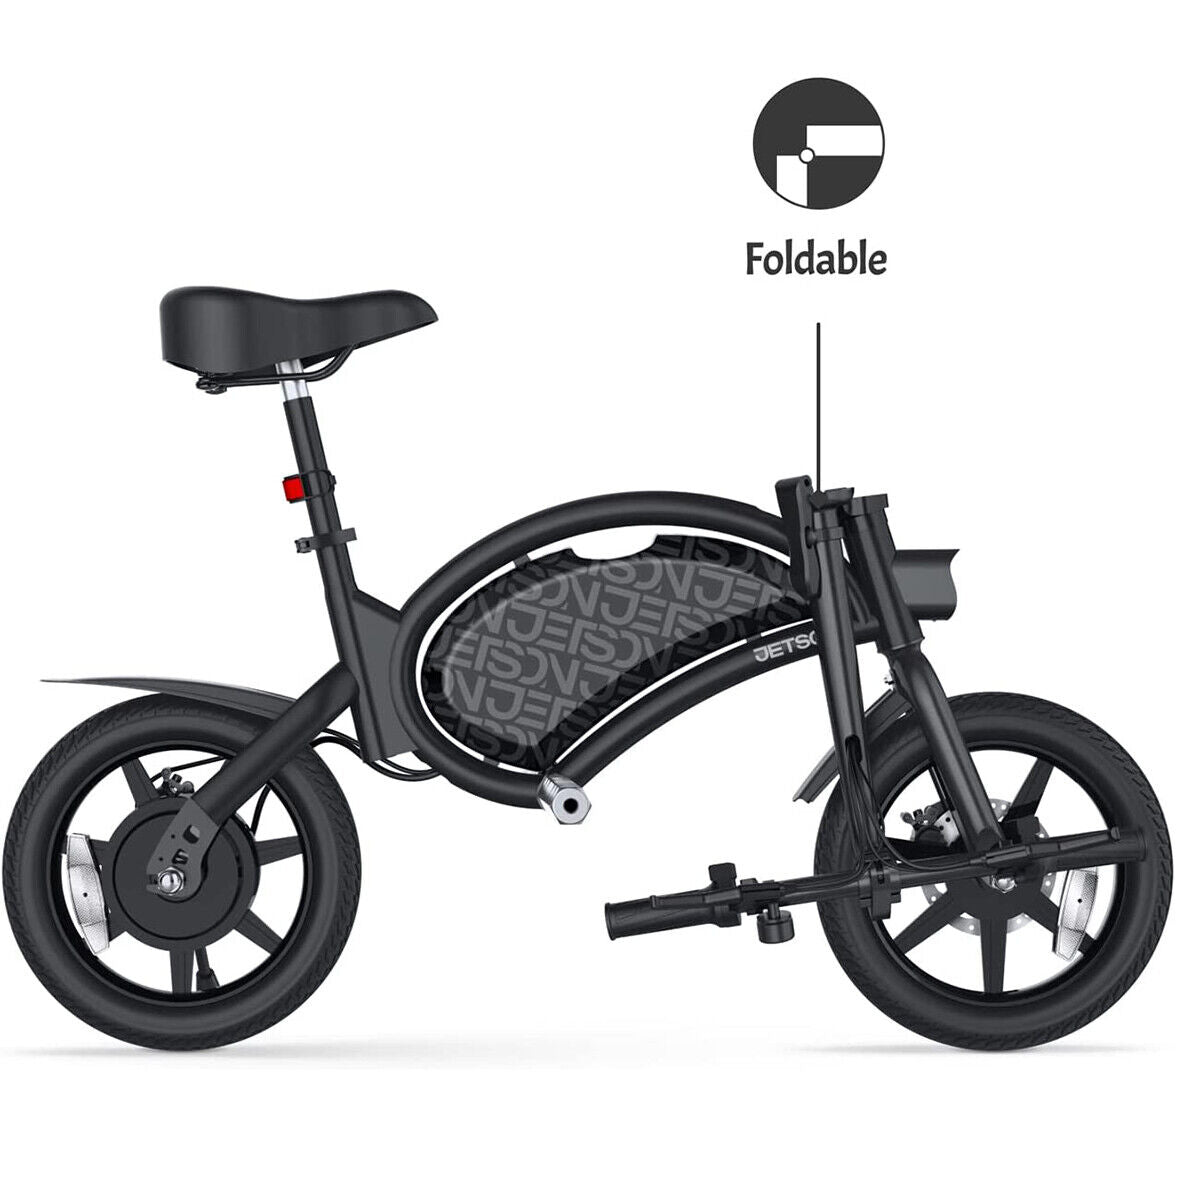 (Out of Stock) Electric Bike City Bicycle Ebike Folding Portable 14" 250W Adult